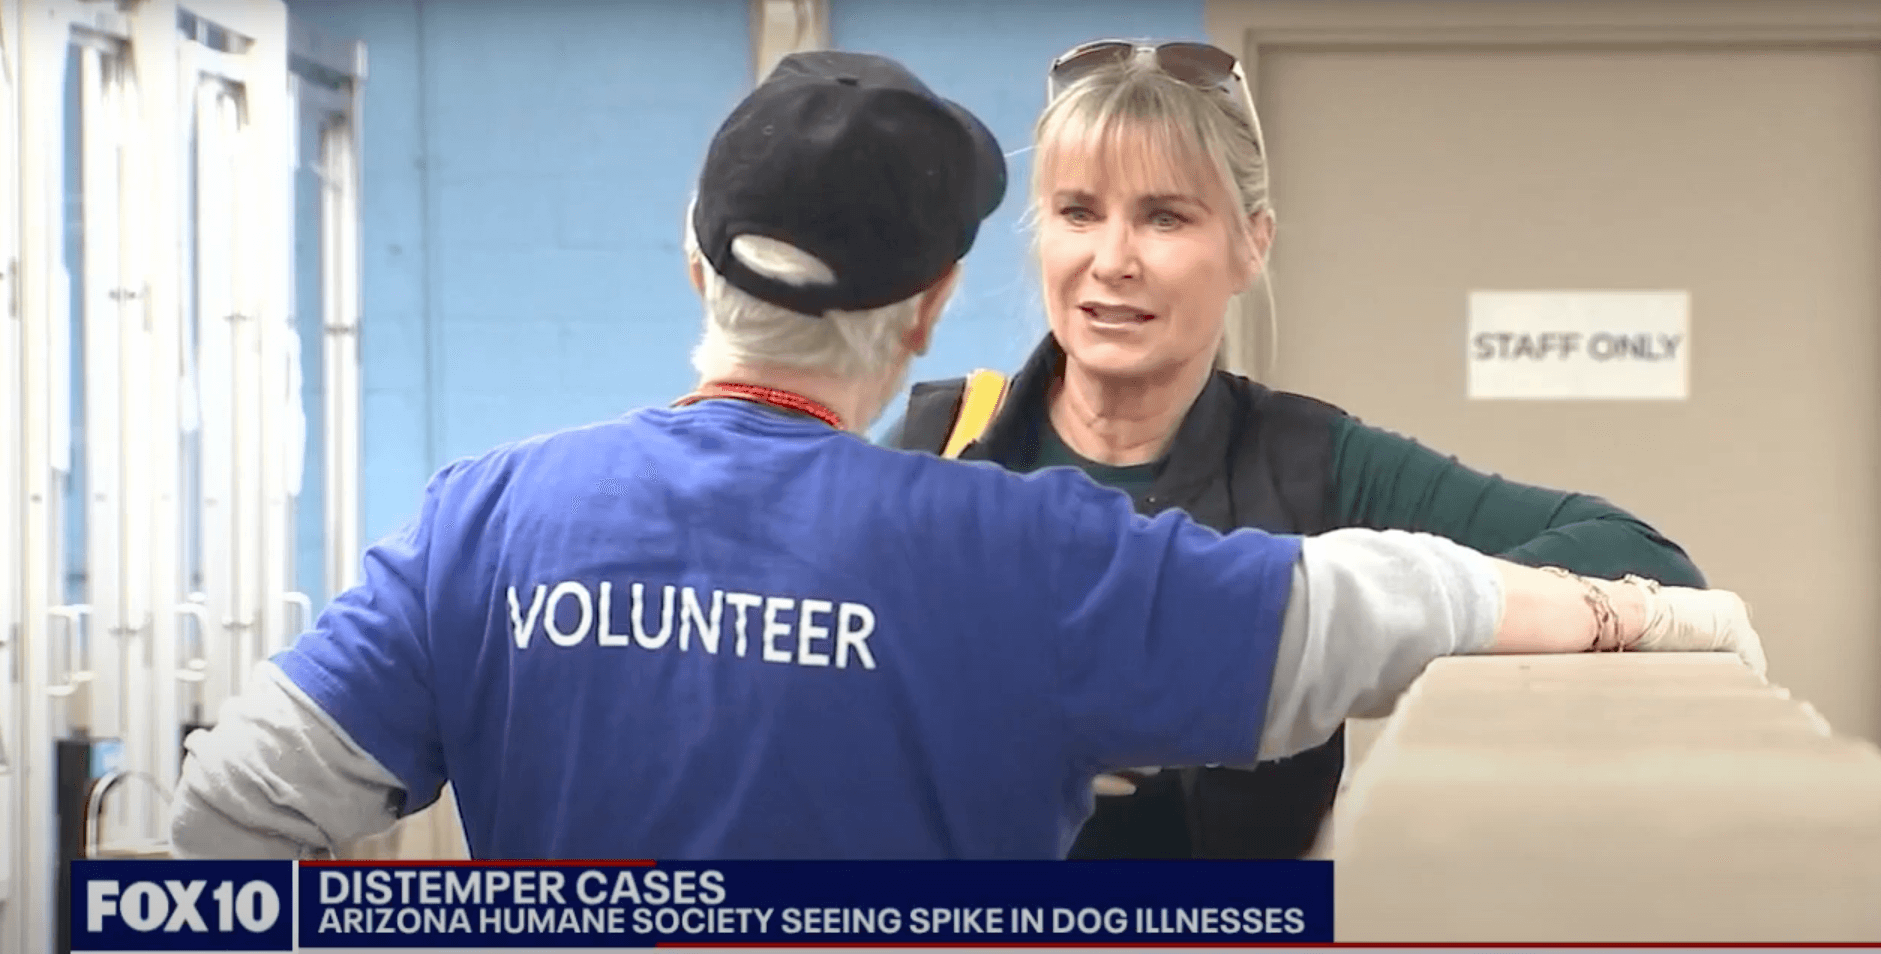 speaking with a volunteer on the news